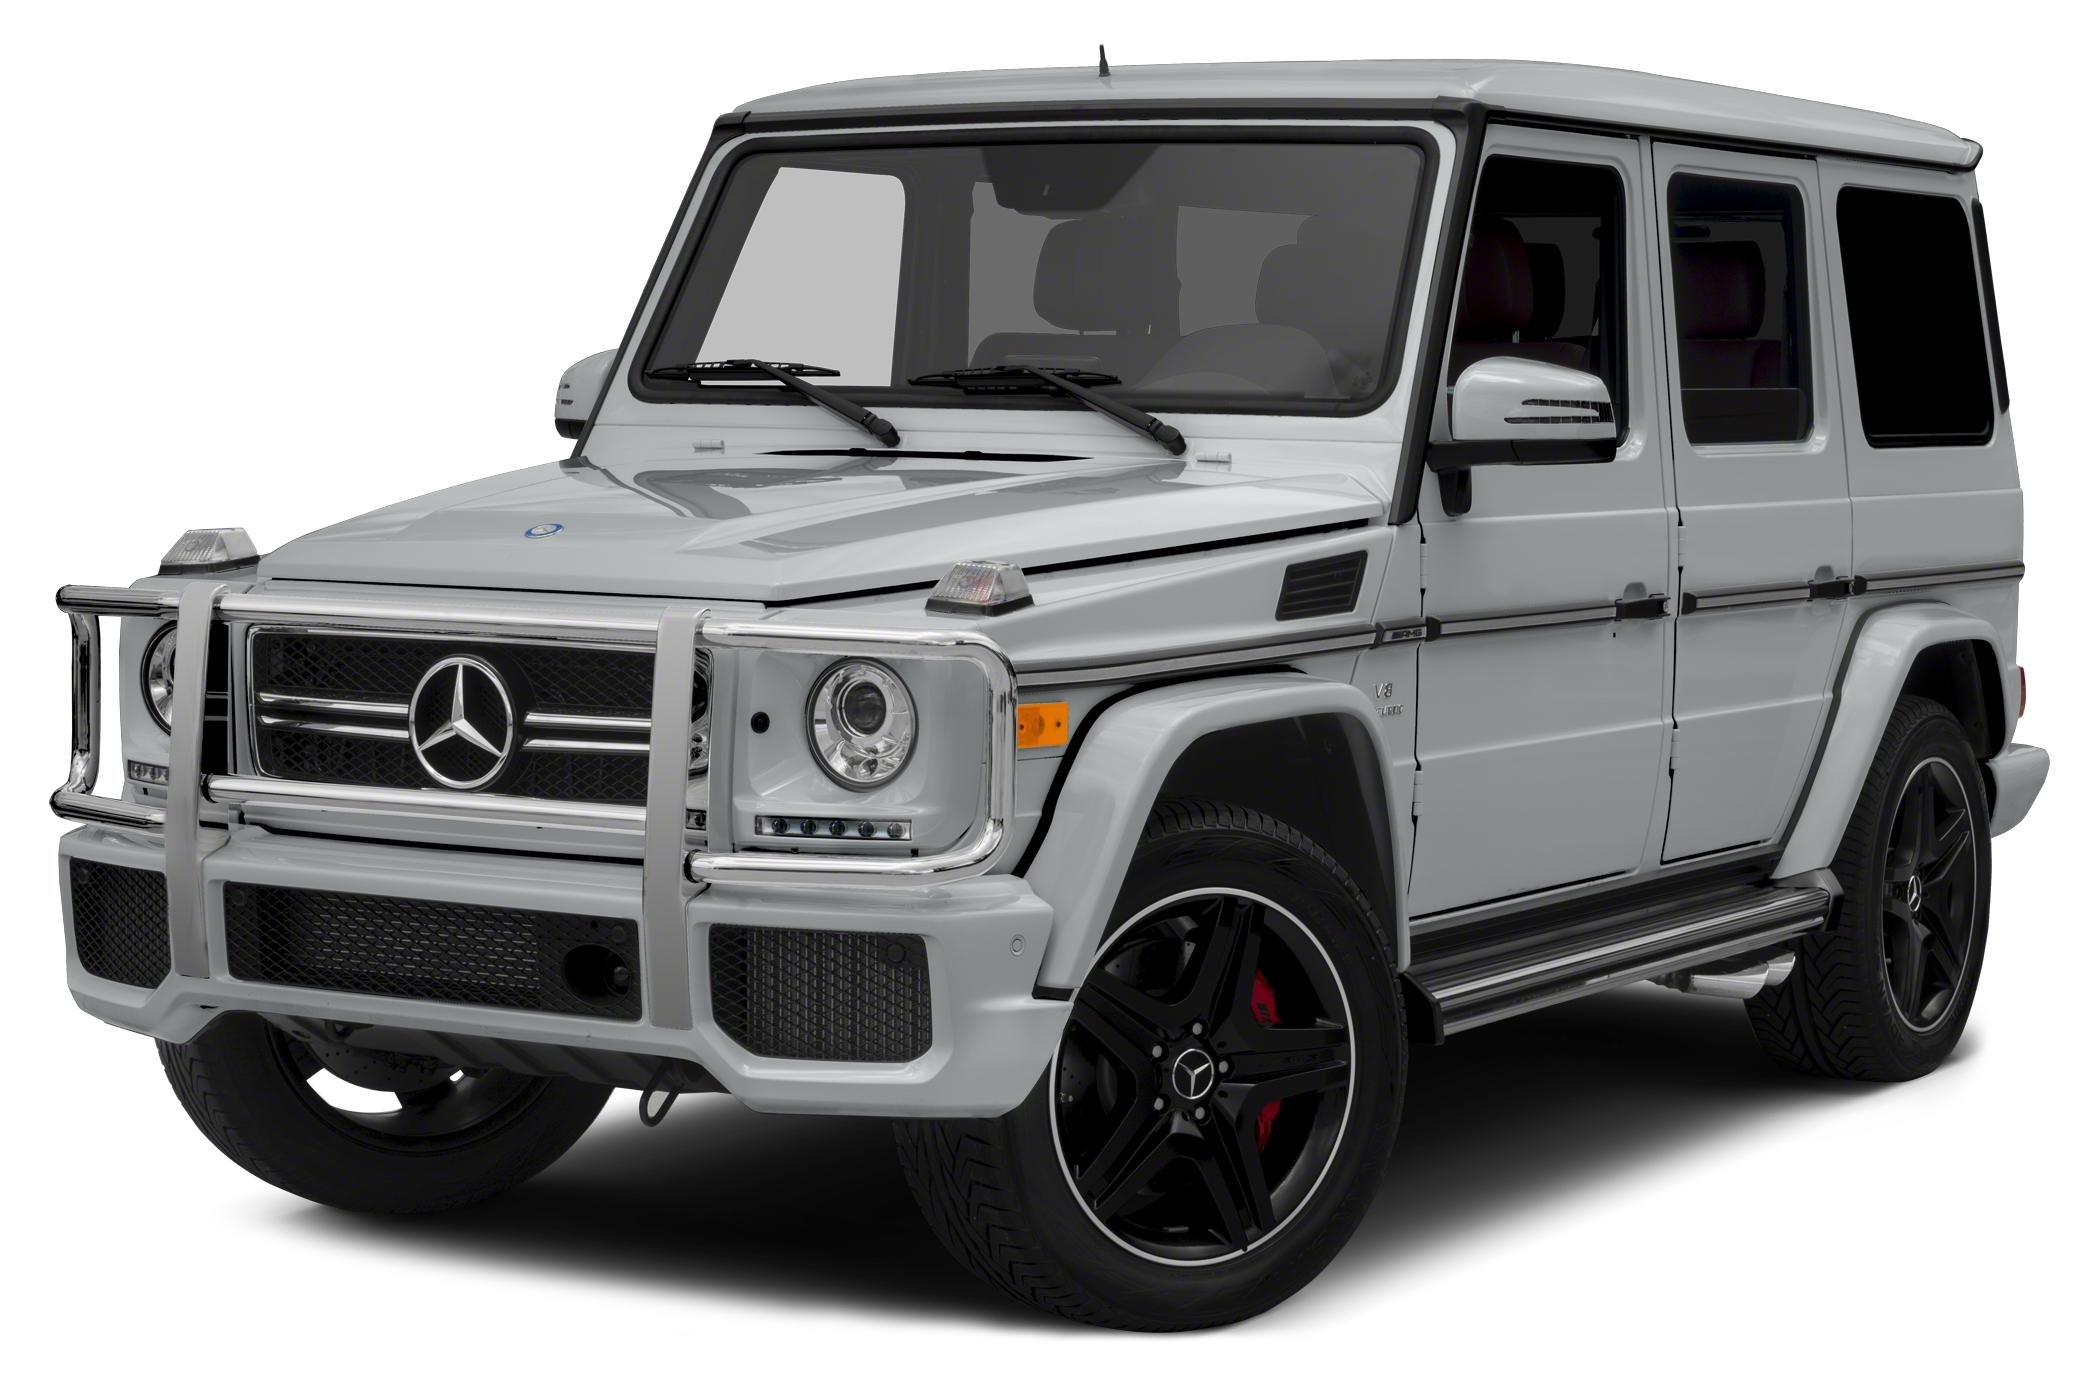 Used 2014 Mercedes-Benz G-Class for Sale Near Me | Cars.com